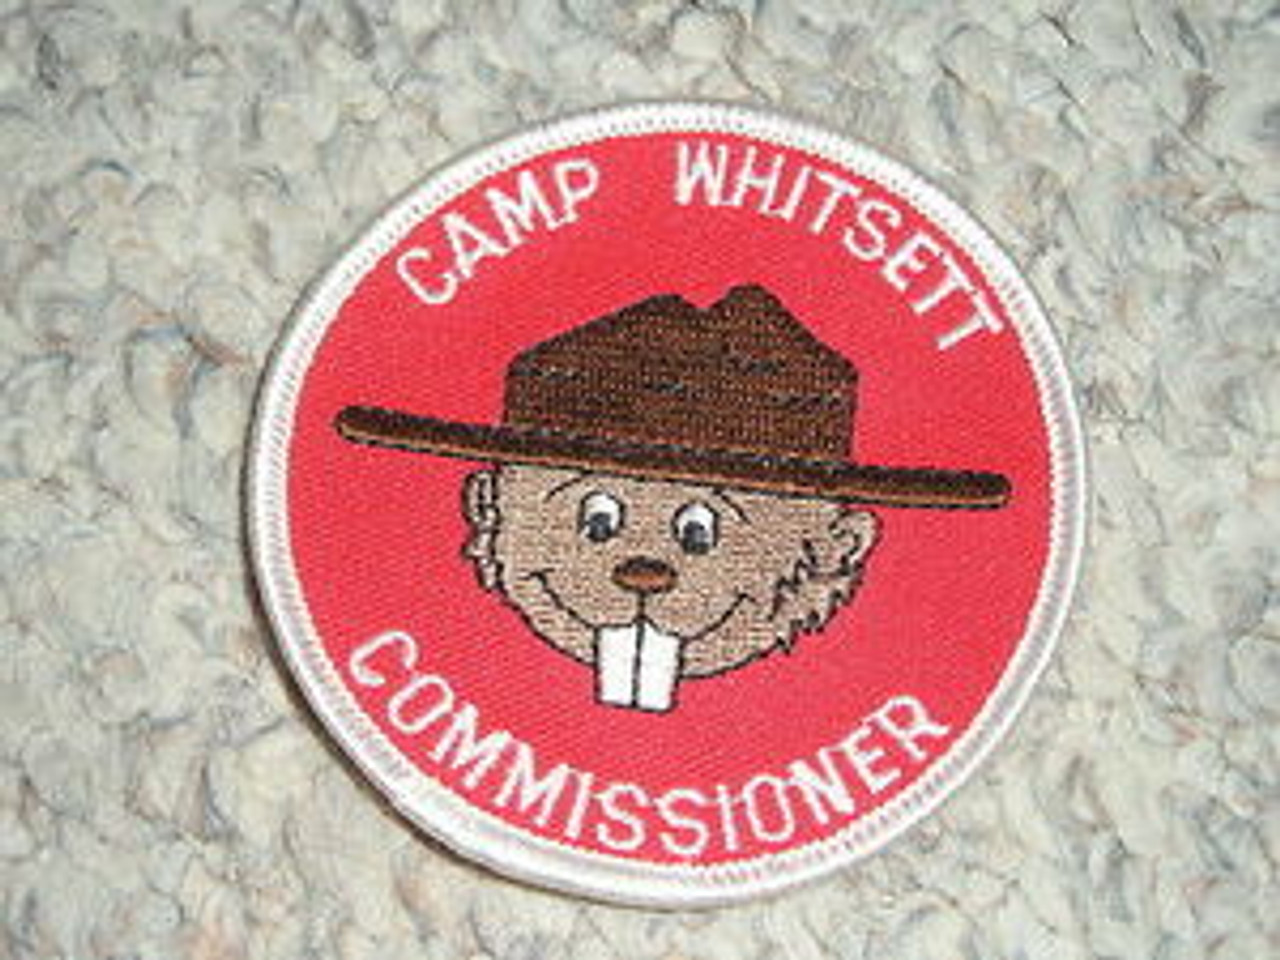 1990's Camp Whitsett Commissioner Patch - Scout